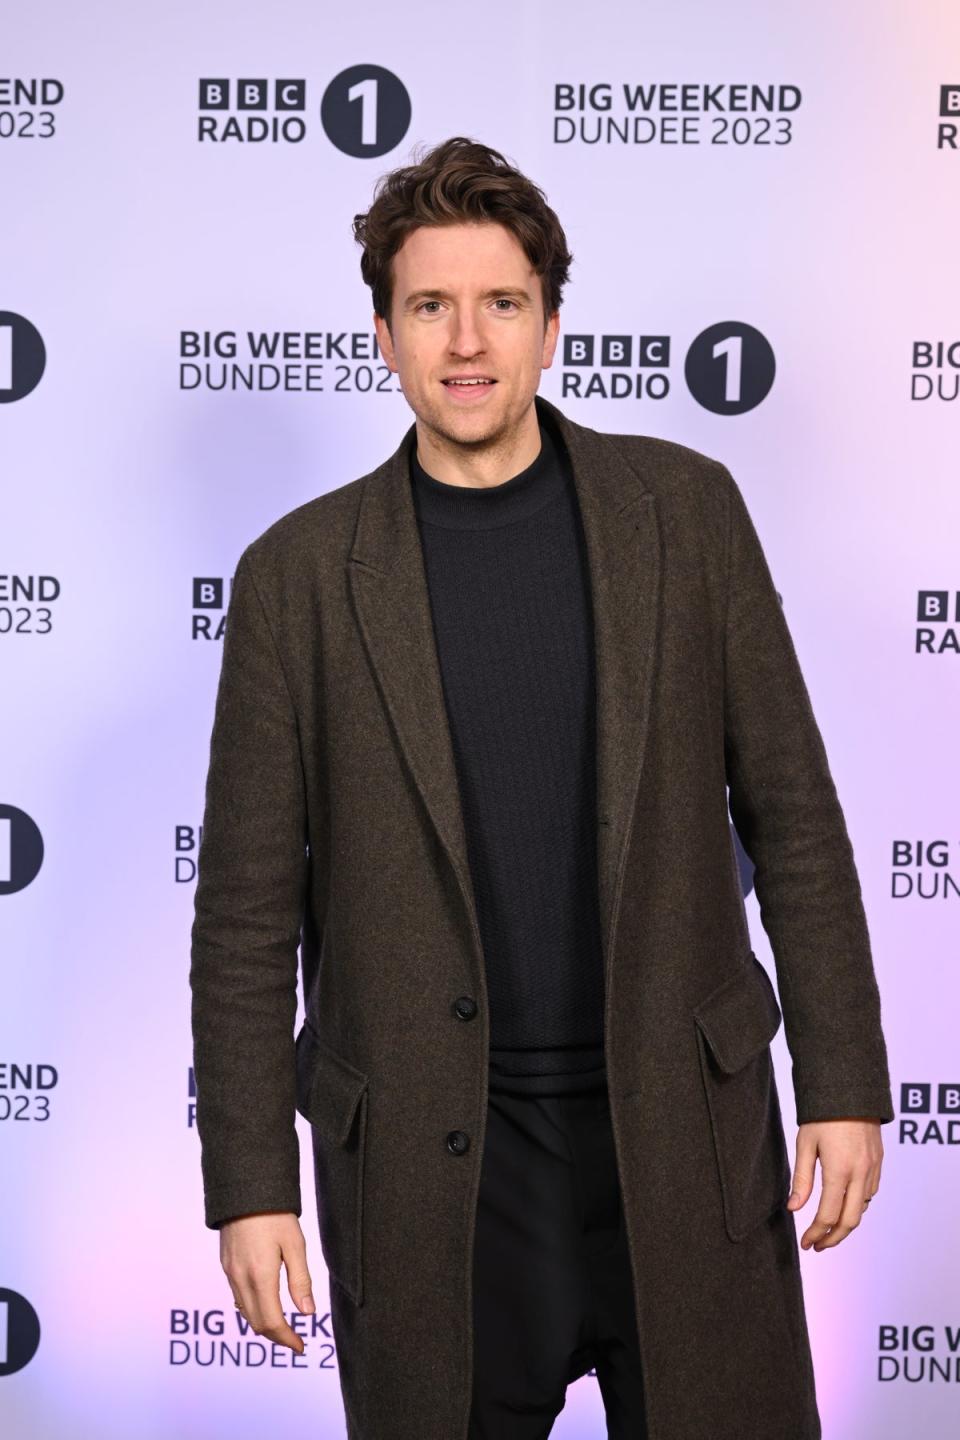 Greg James also opened up about suffering with moments of ‘self-doubt’ (Getty Images)